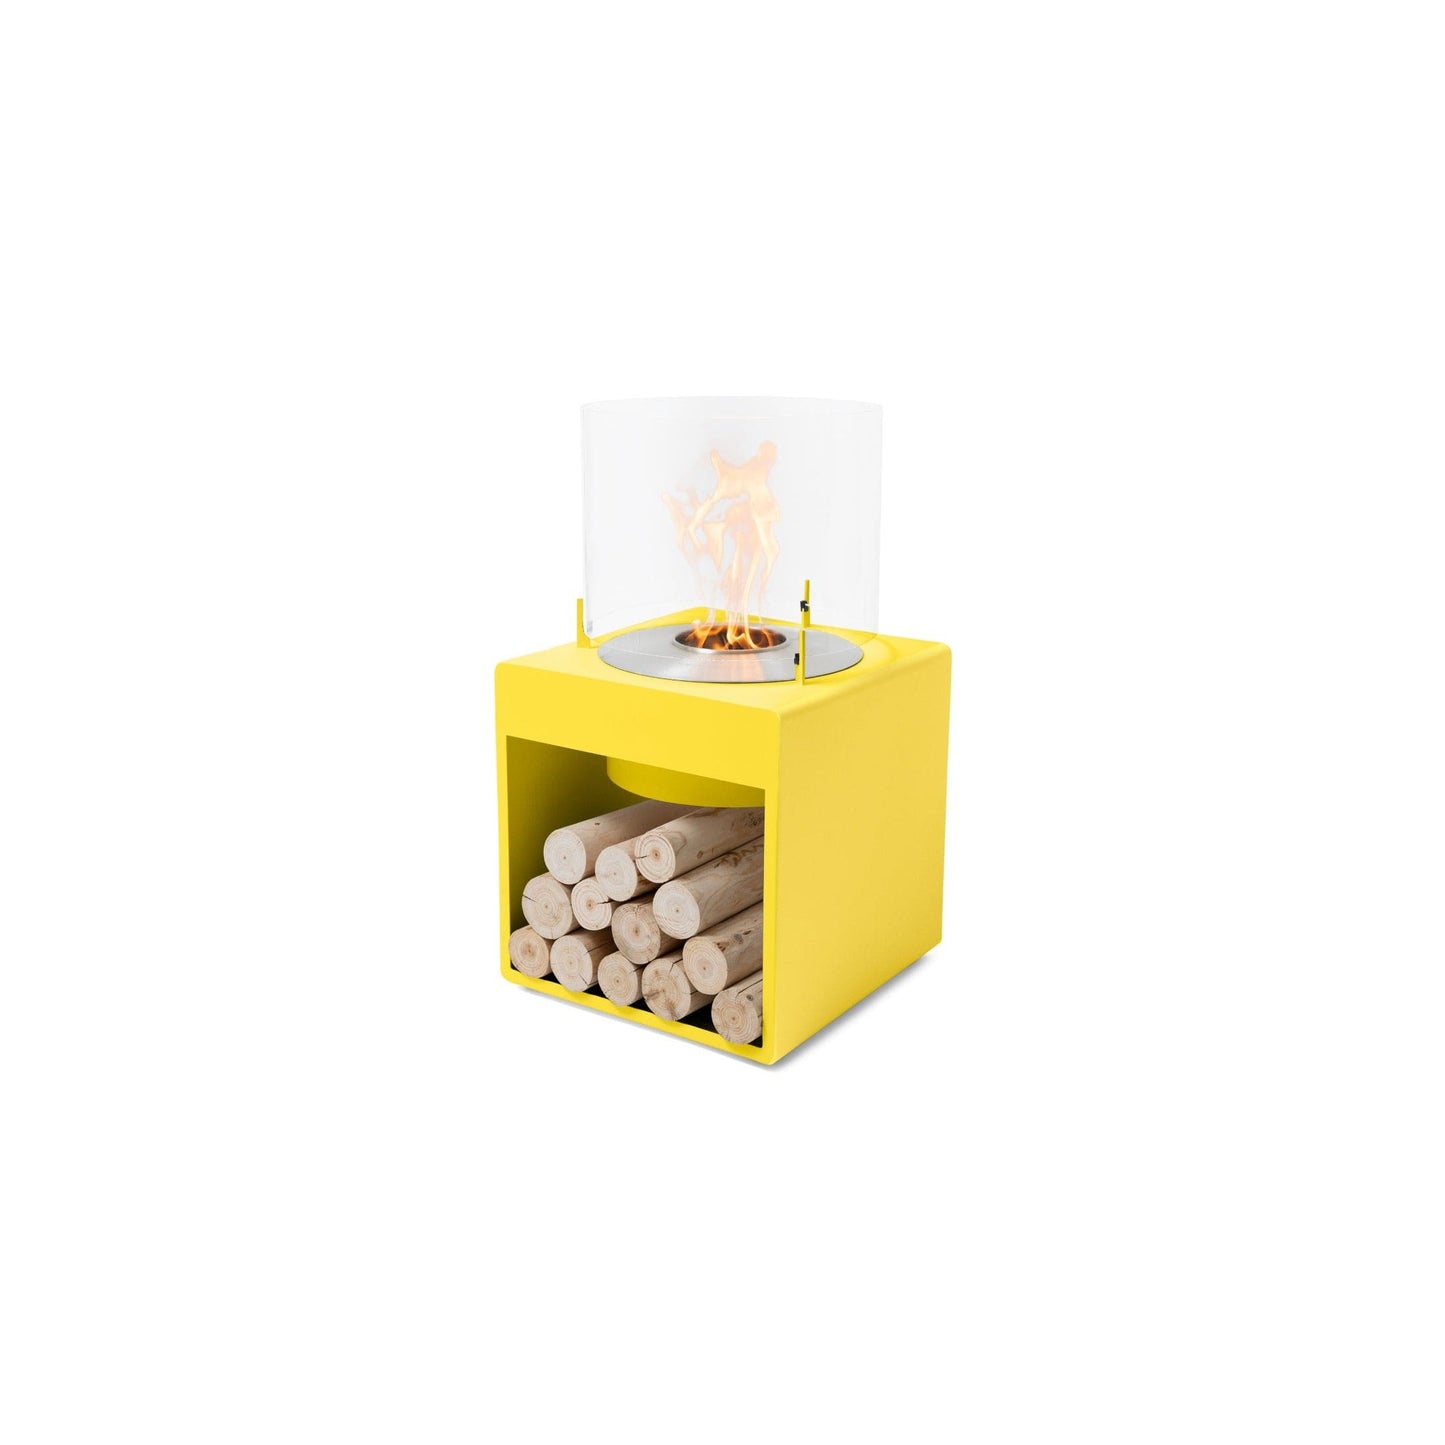 EcoSmart Fire POP 8L 31" Yellow Freestanding Designer Fireplace with Stainless Steel Burner by MAD Design Group